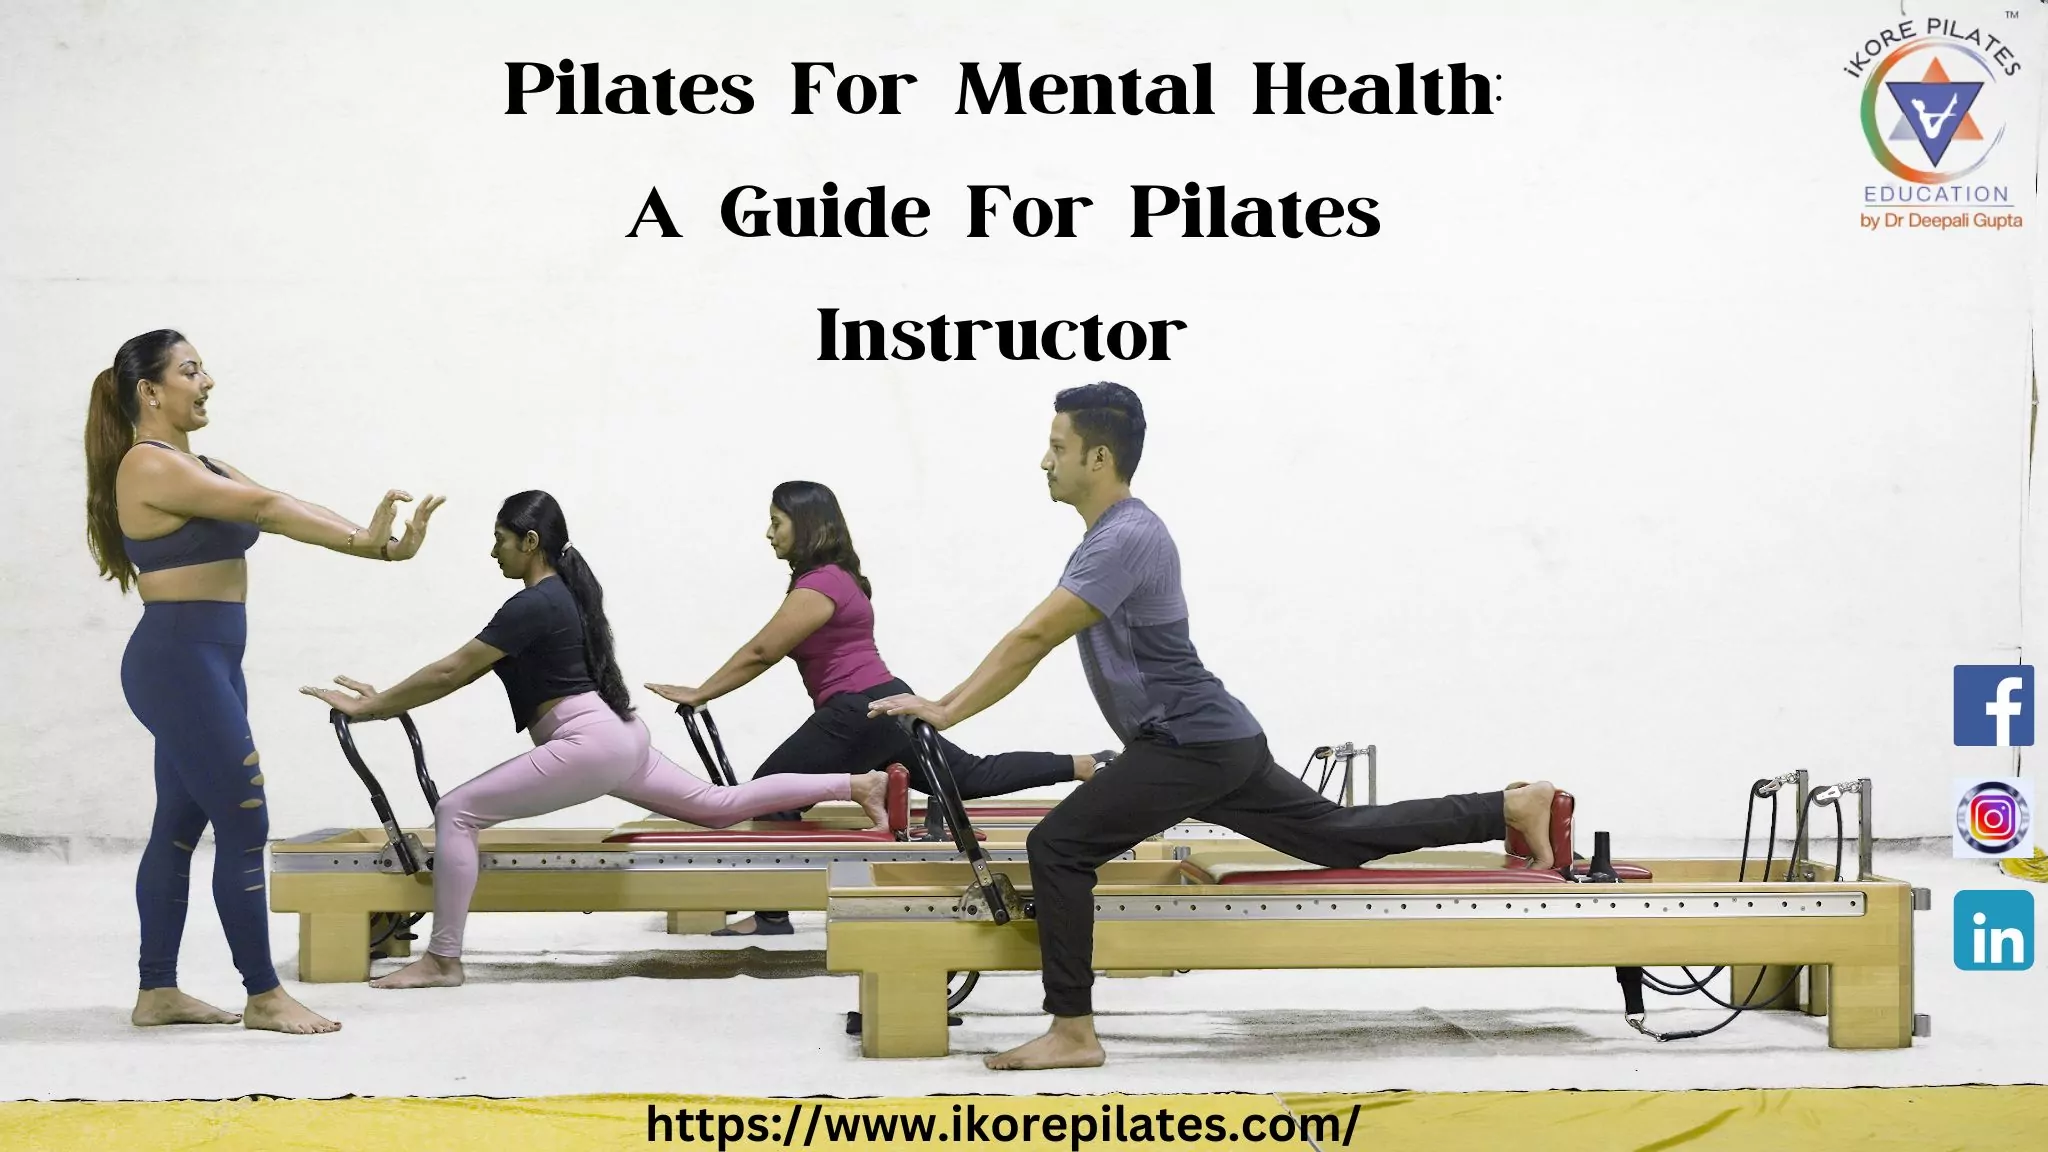 Pilates for Mental Health A Guide for Pilates Instructor